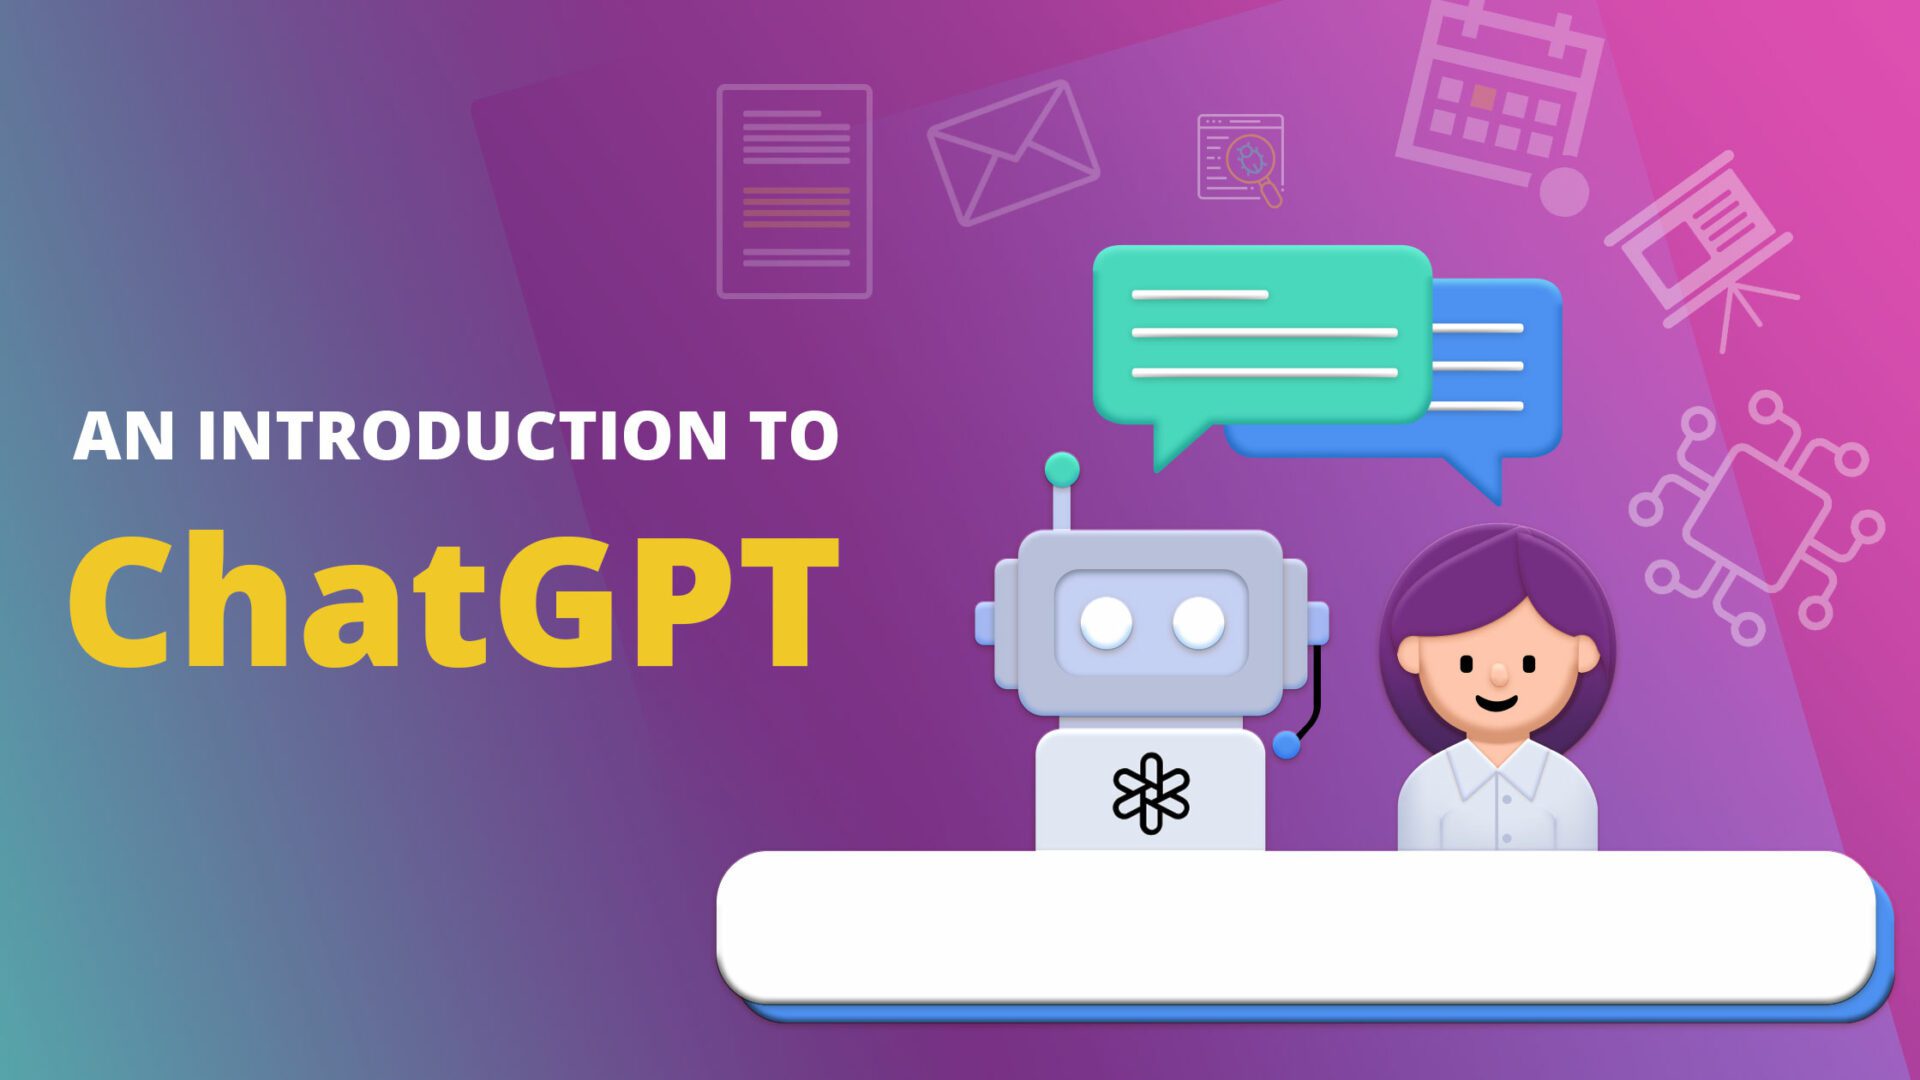 Colorful presentation slide titled 'An Introduction to ChatGPT' featuring a friendly robot character and a person smiling, with speech bubbles indicating a conversation. The background is split diagonally with purple and blue hues, adorned with various icons such as documents, email, presentation, calendar, and data analytics, symbolizing different aspects of digital communication and artificial intelligence technology.